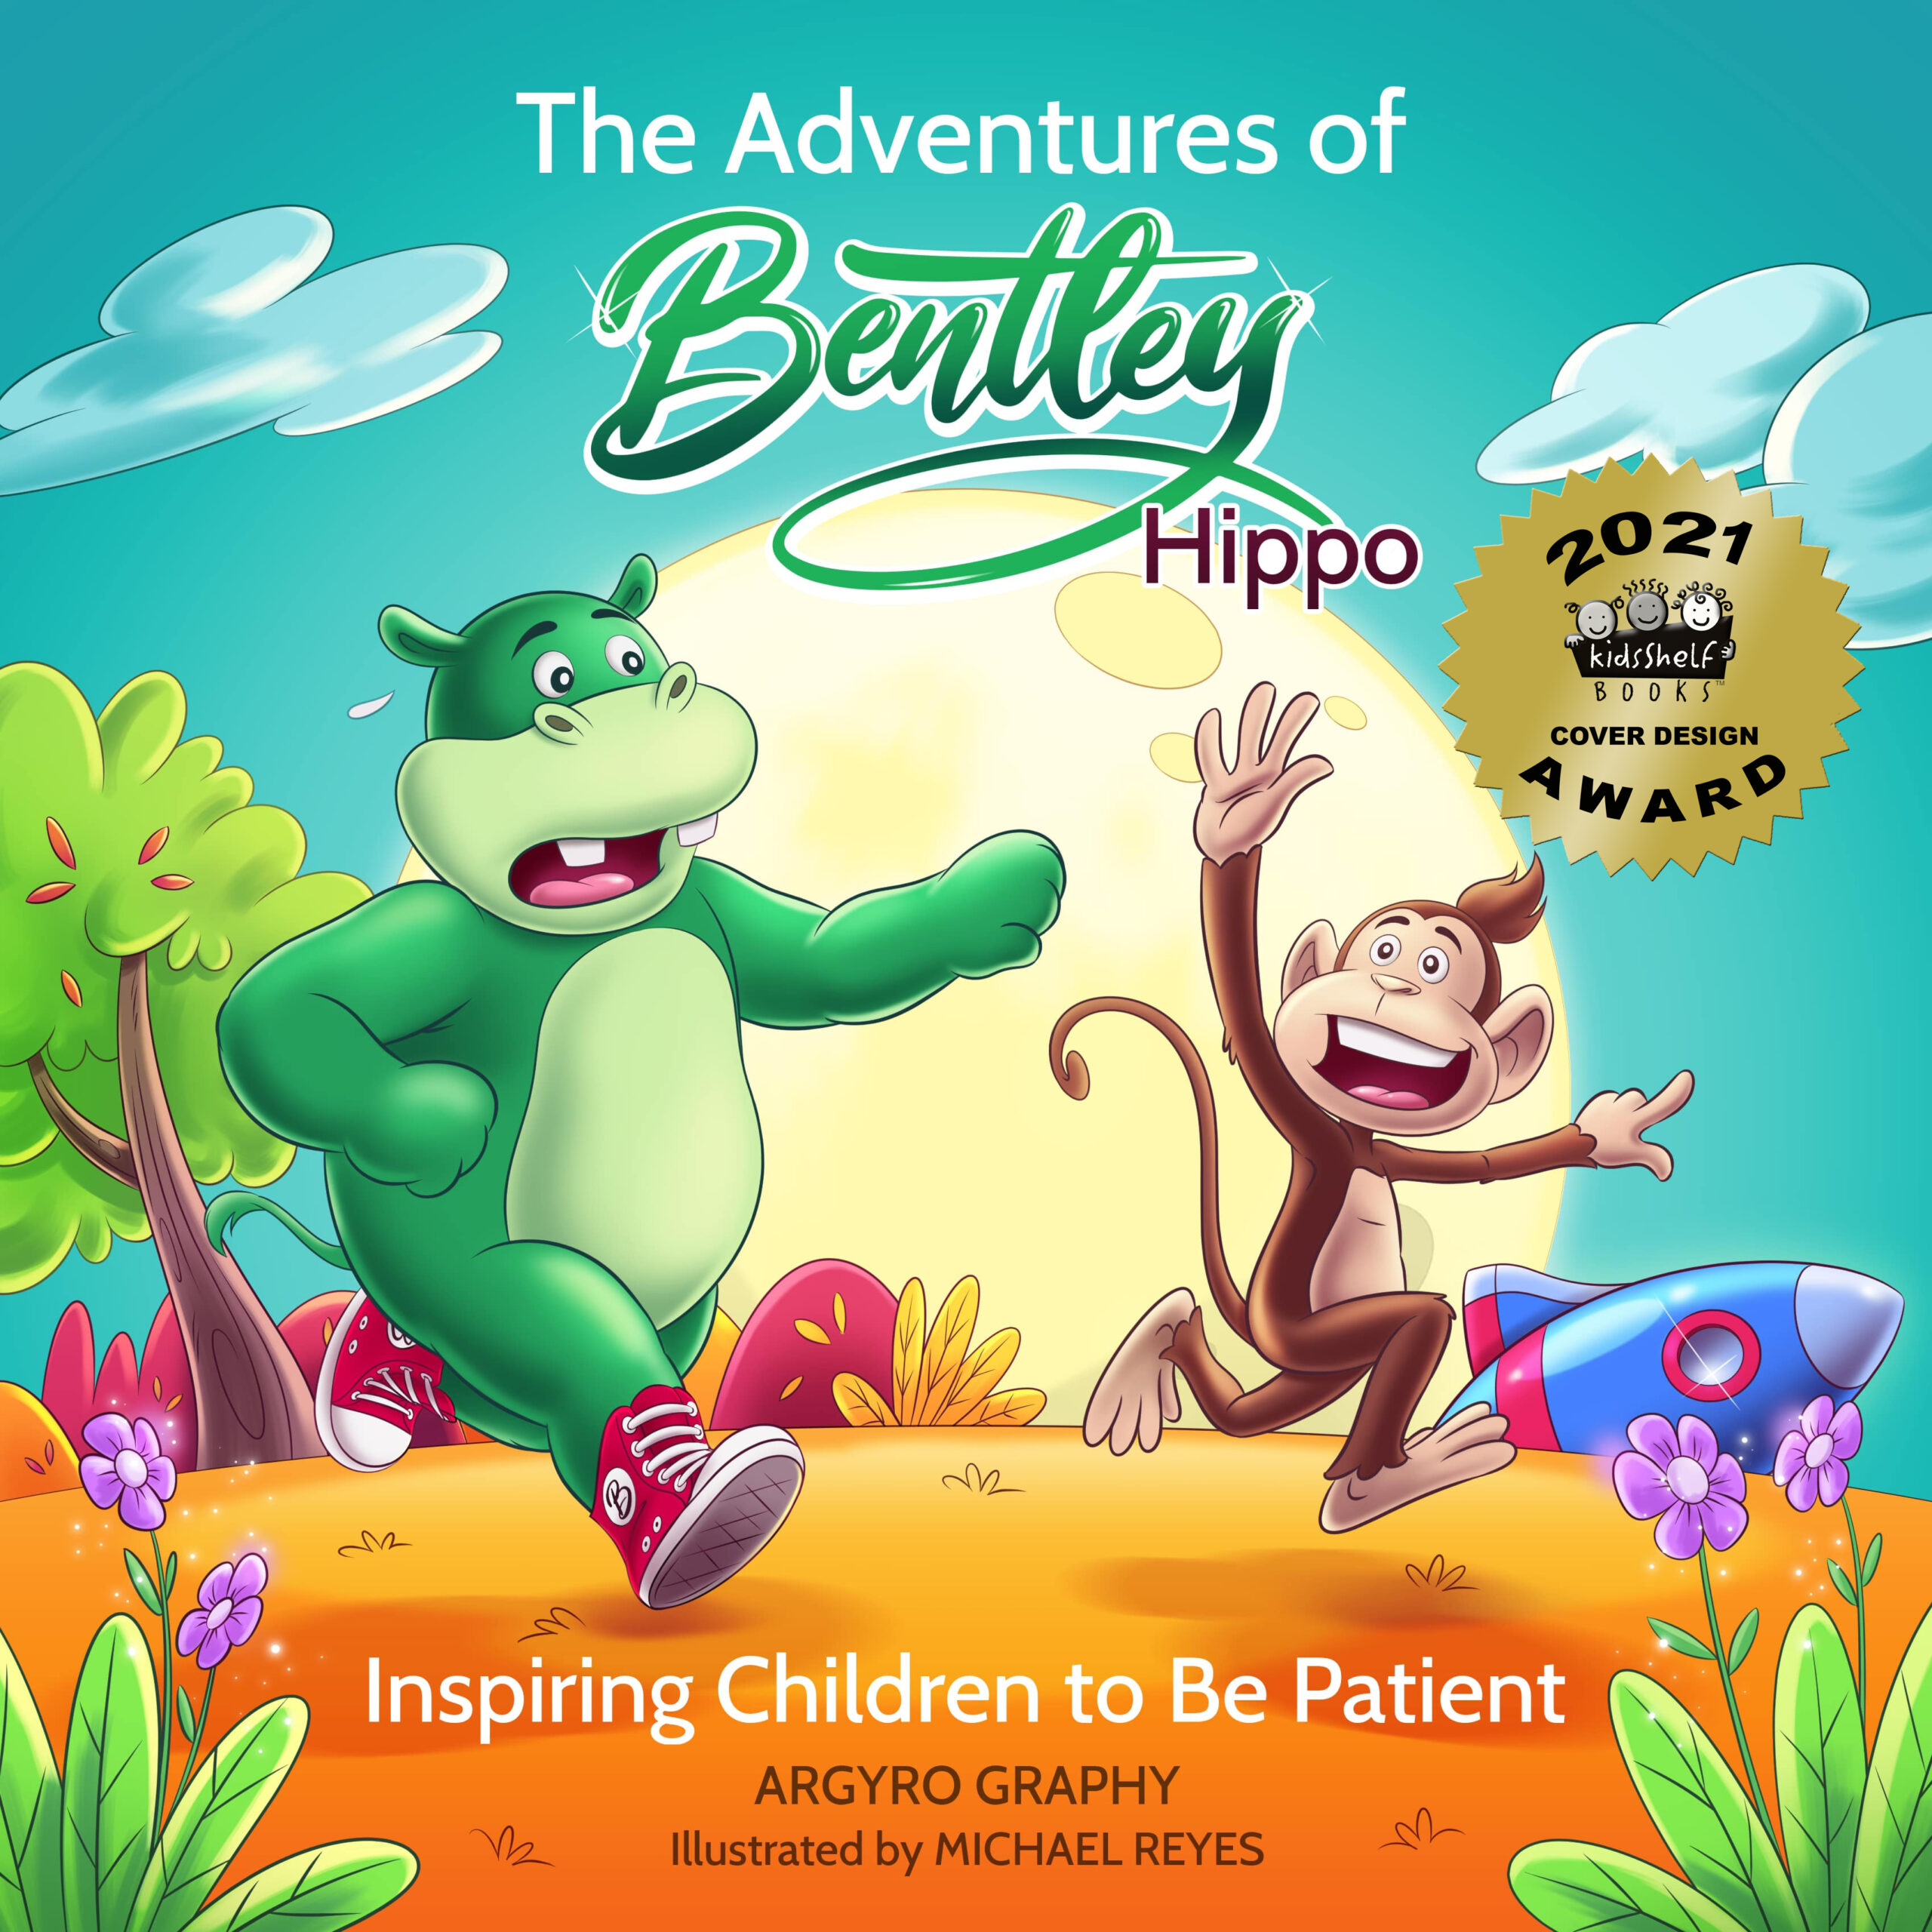 FREE: The Adventures of Bentley Hippo: Inspiring Children to be Patient by Argyro Graphy